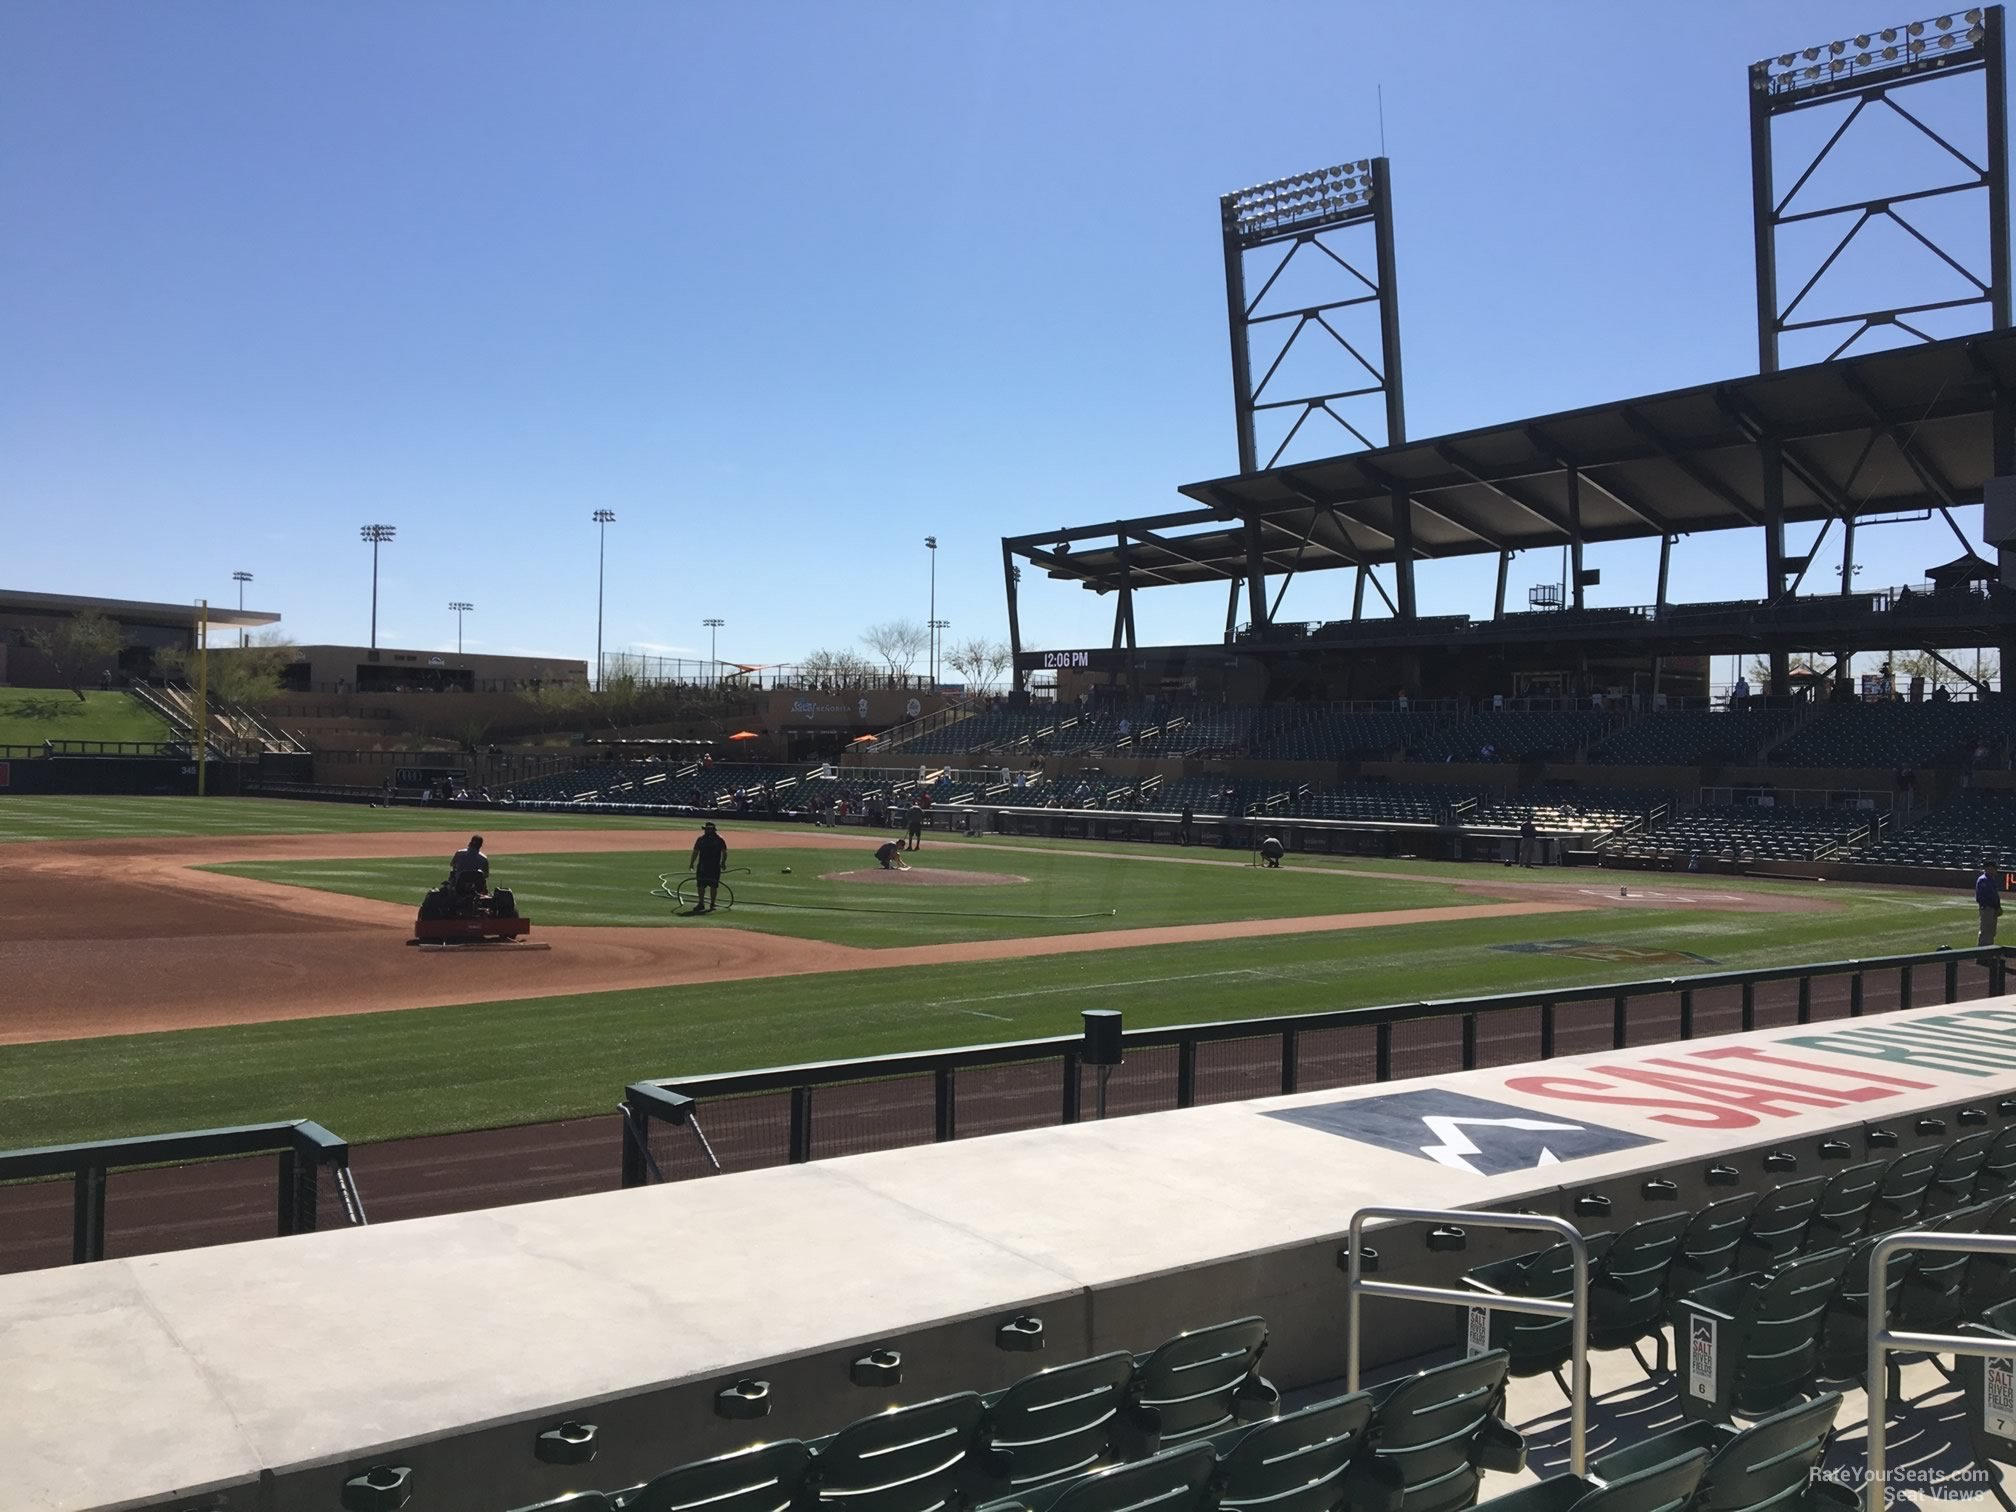 section 119, row 10 seat view  - salt river field at talking stick